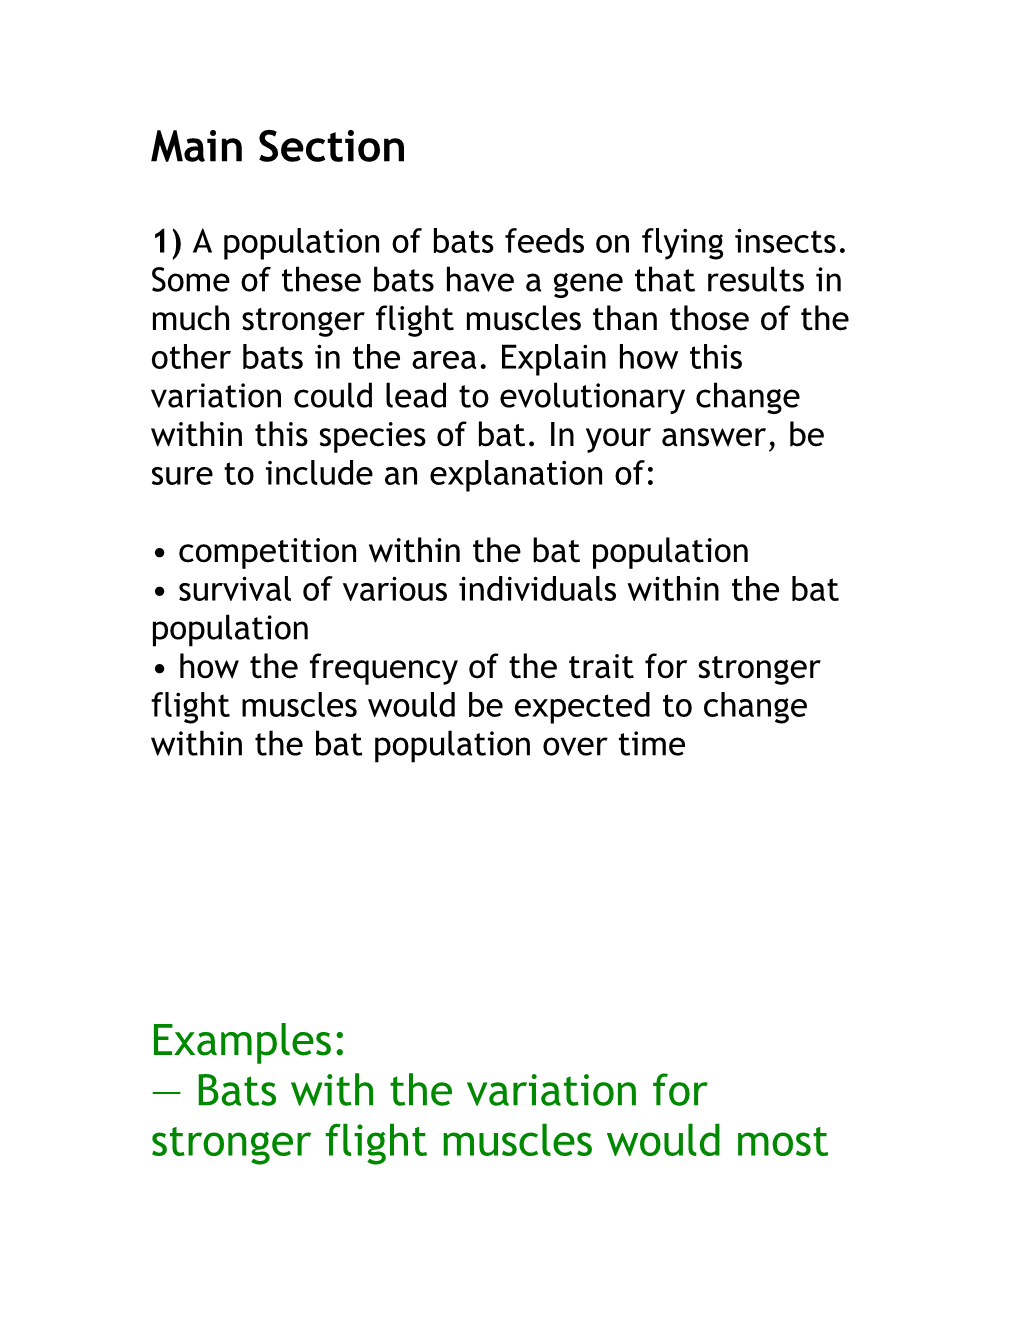 Main Section 1) a Population of Bats Feeds on Flying Insects. Some of These Bats Have A